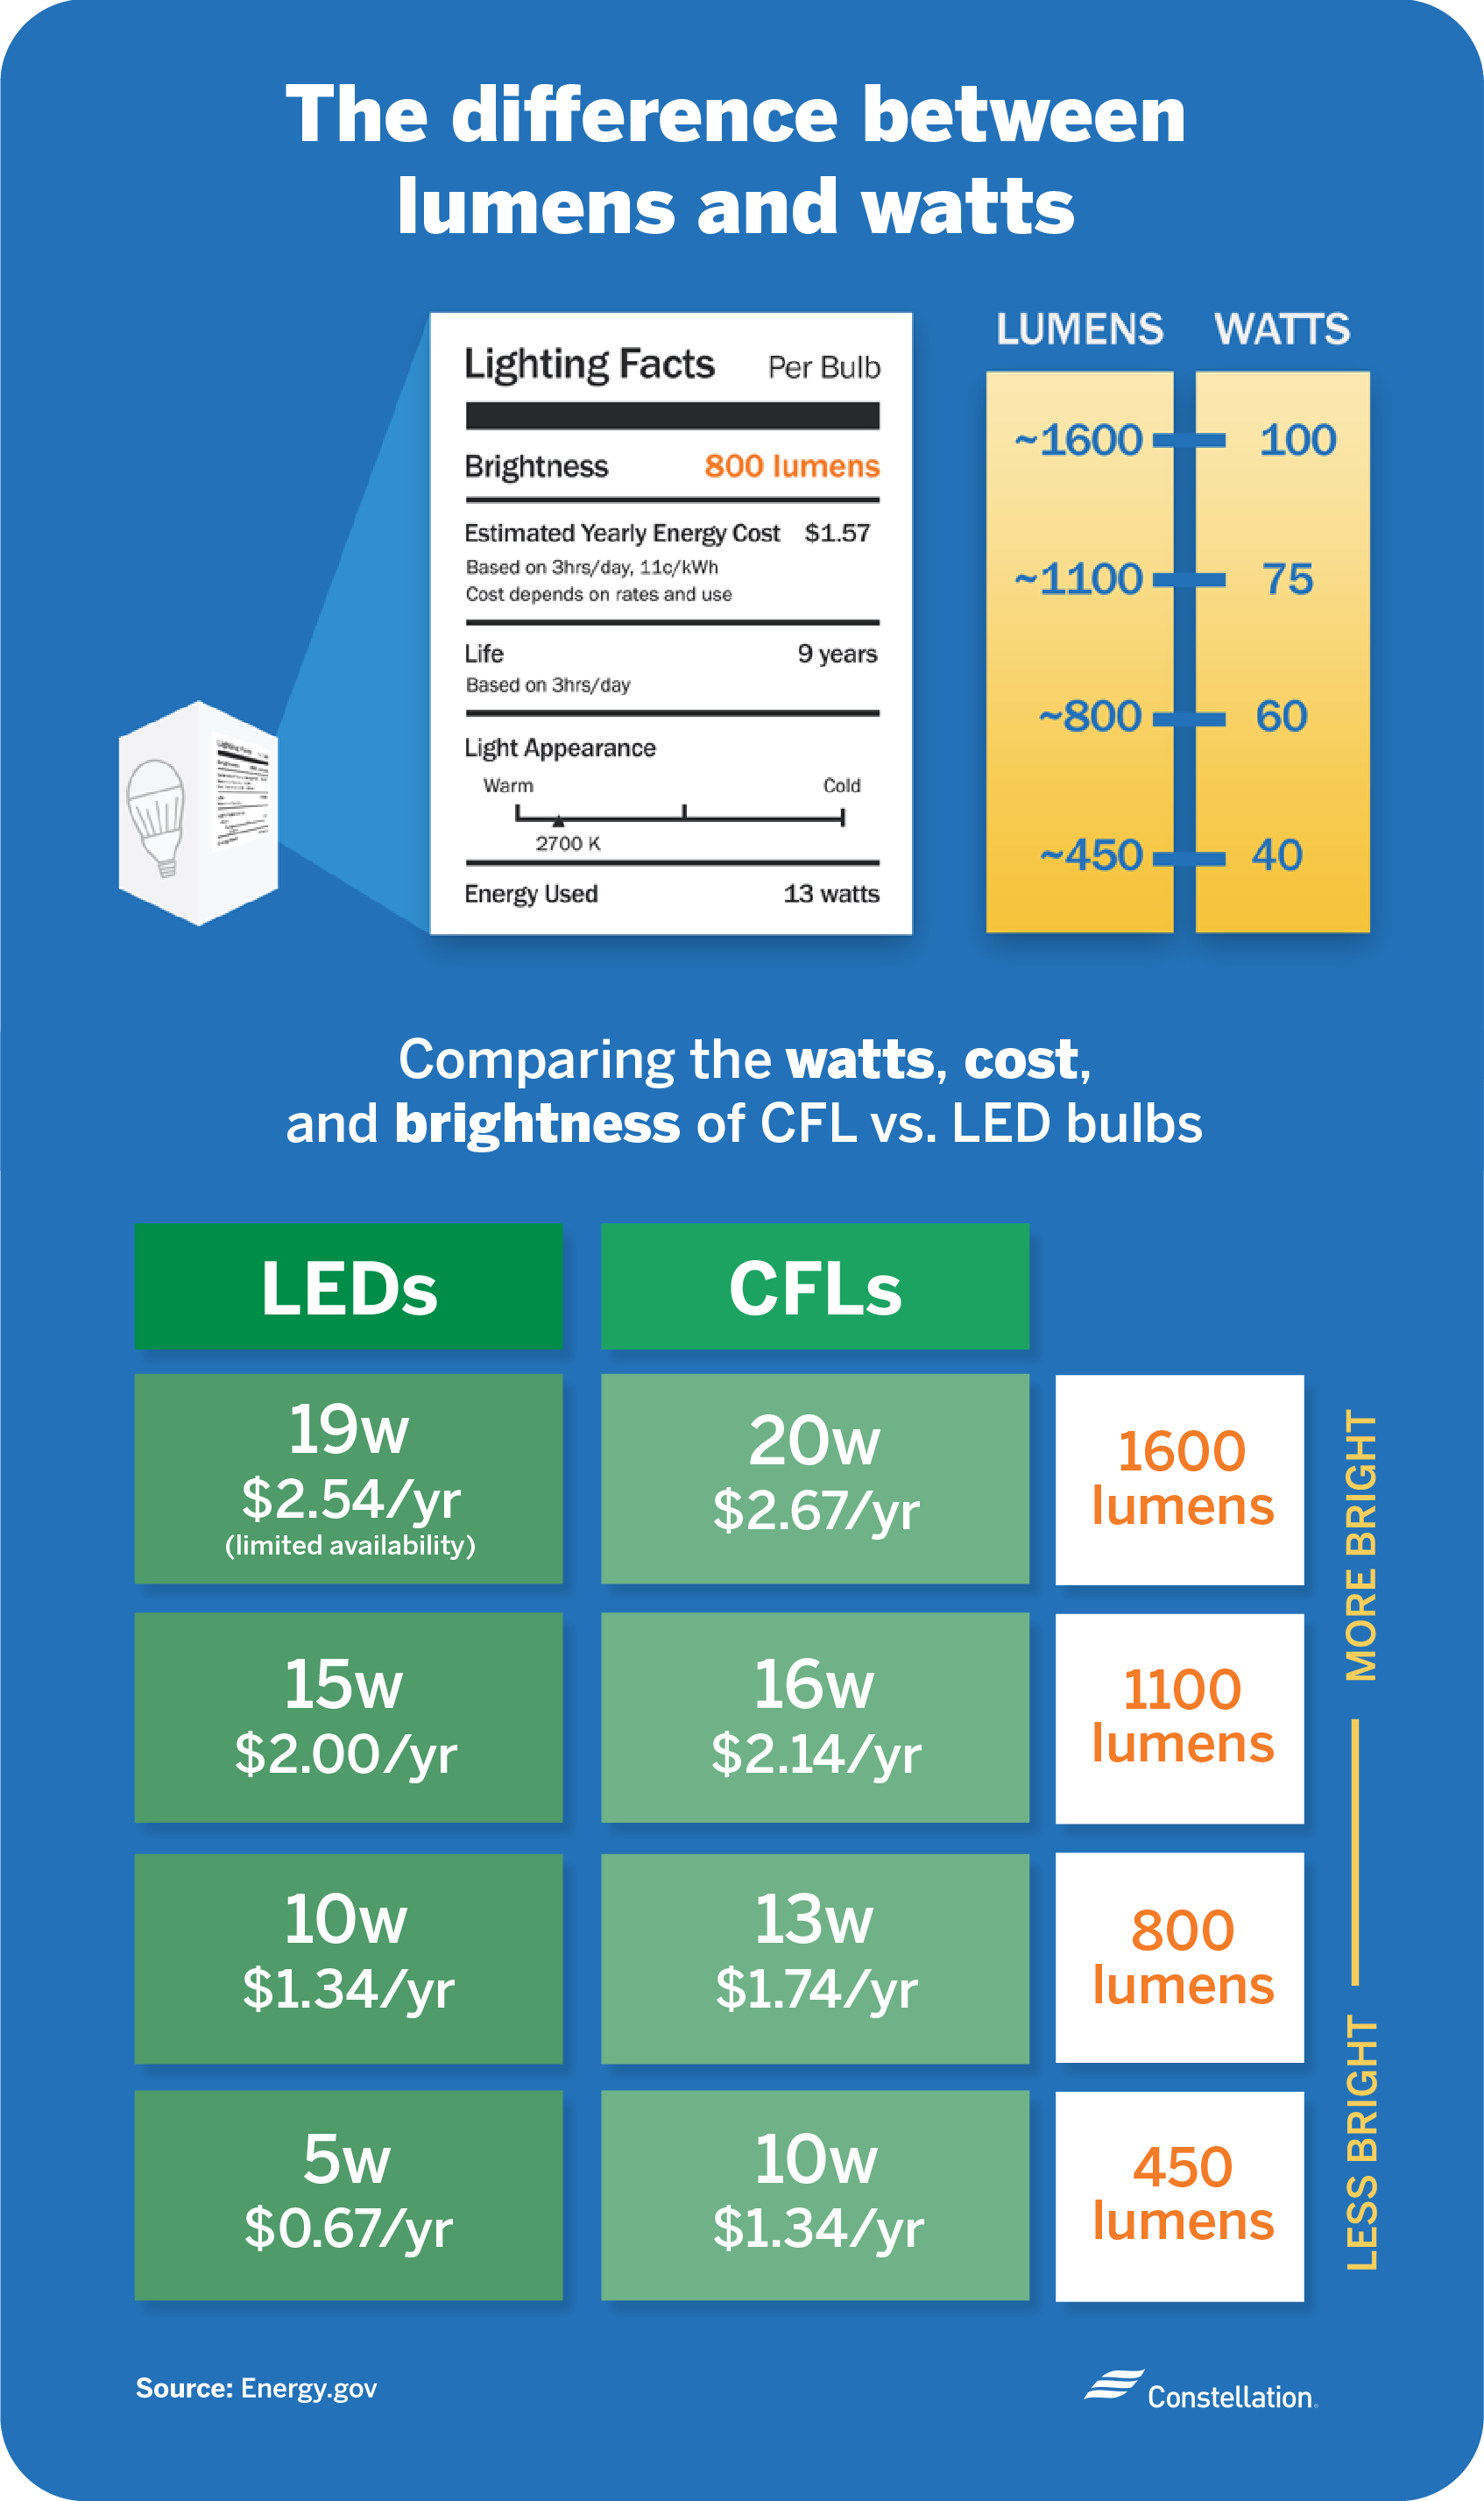 The difference between lumens and watts.